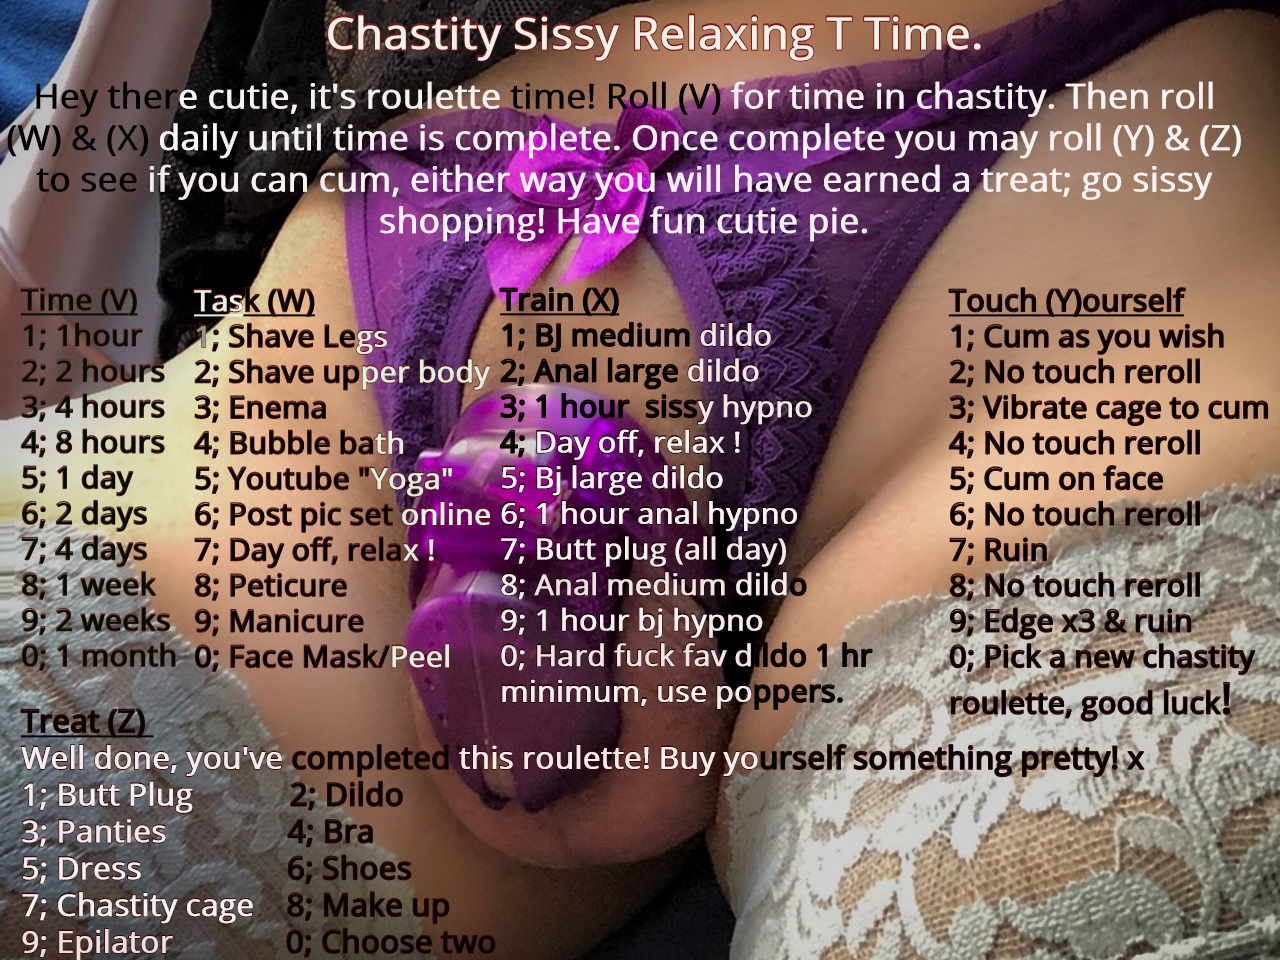 This roulette is inside the Sissy category. 